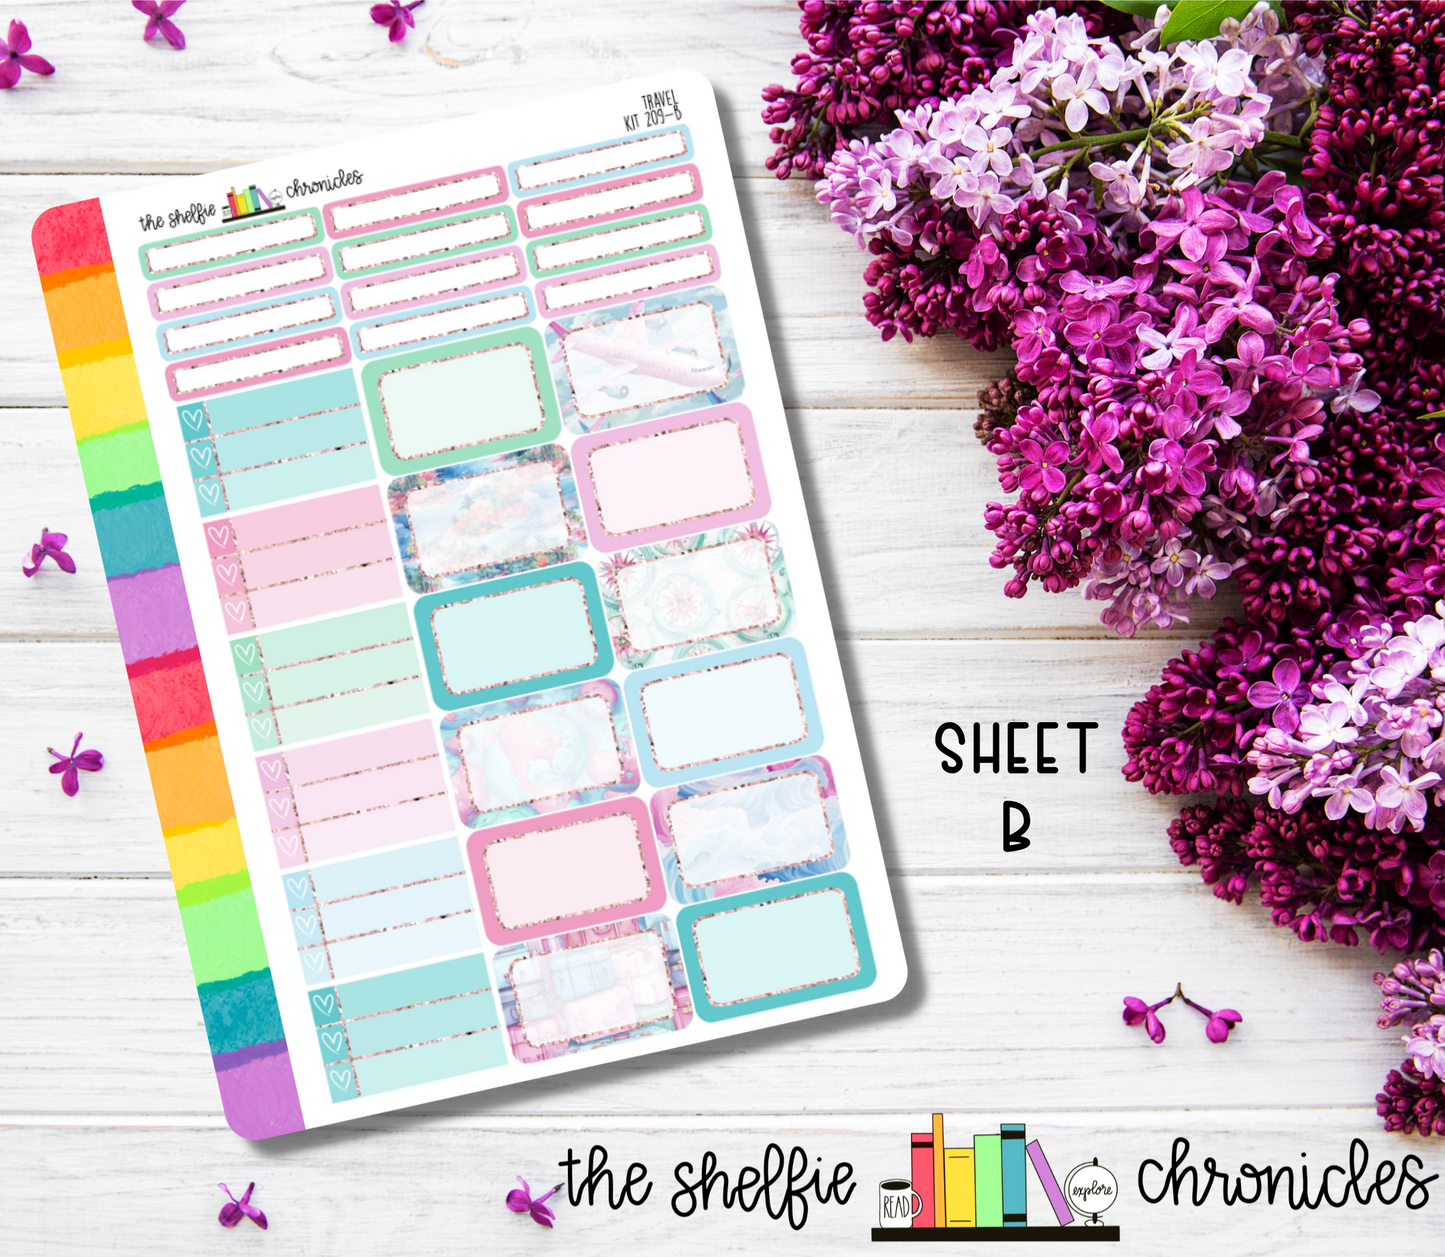 Kit 209 - Travel Weekly Kit - Die Cut Stickers - Repositionable Paper - Made To Fit 7x9 Planners